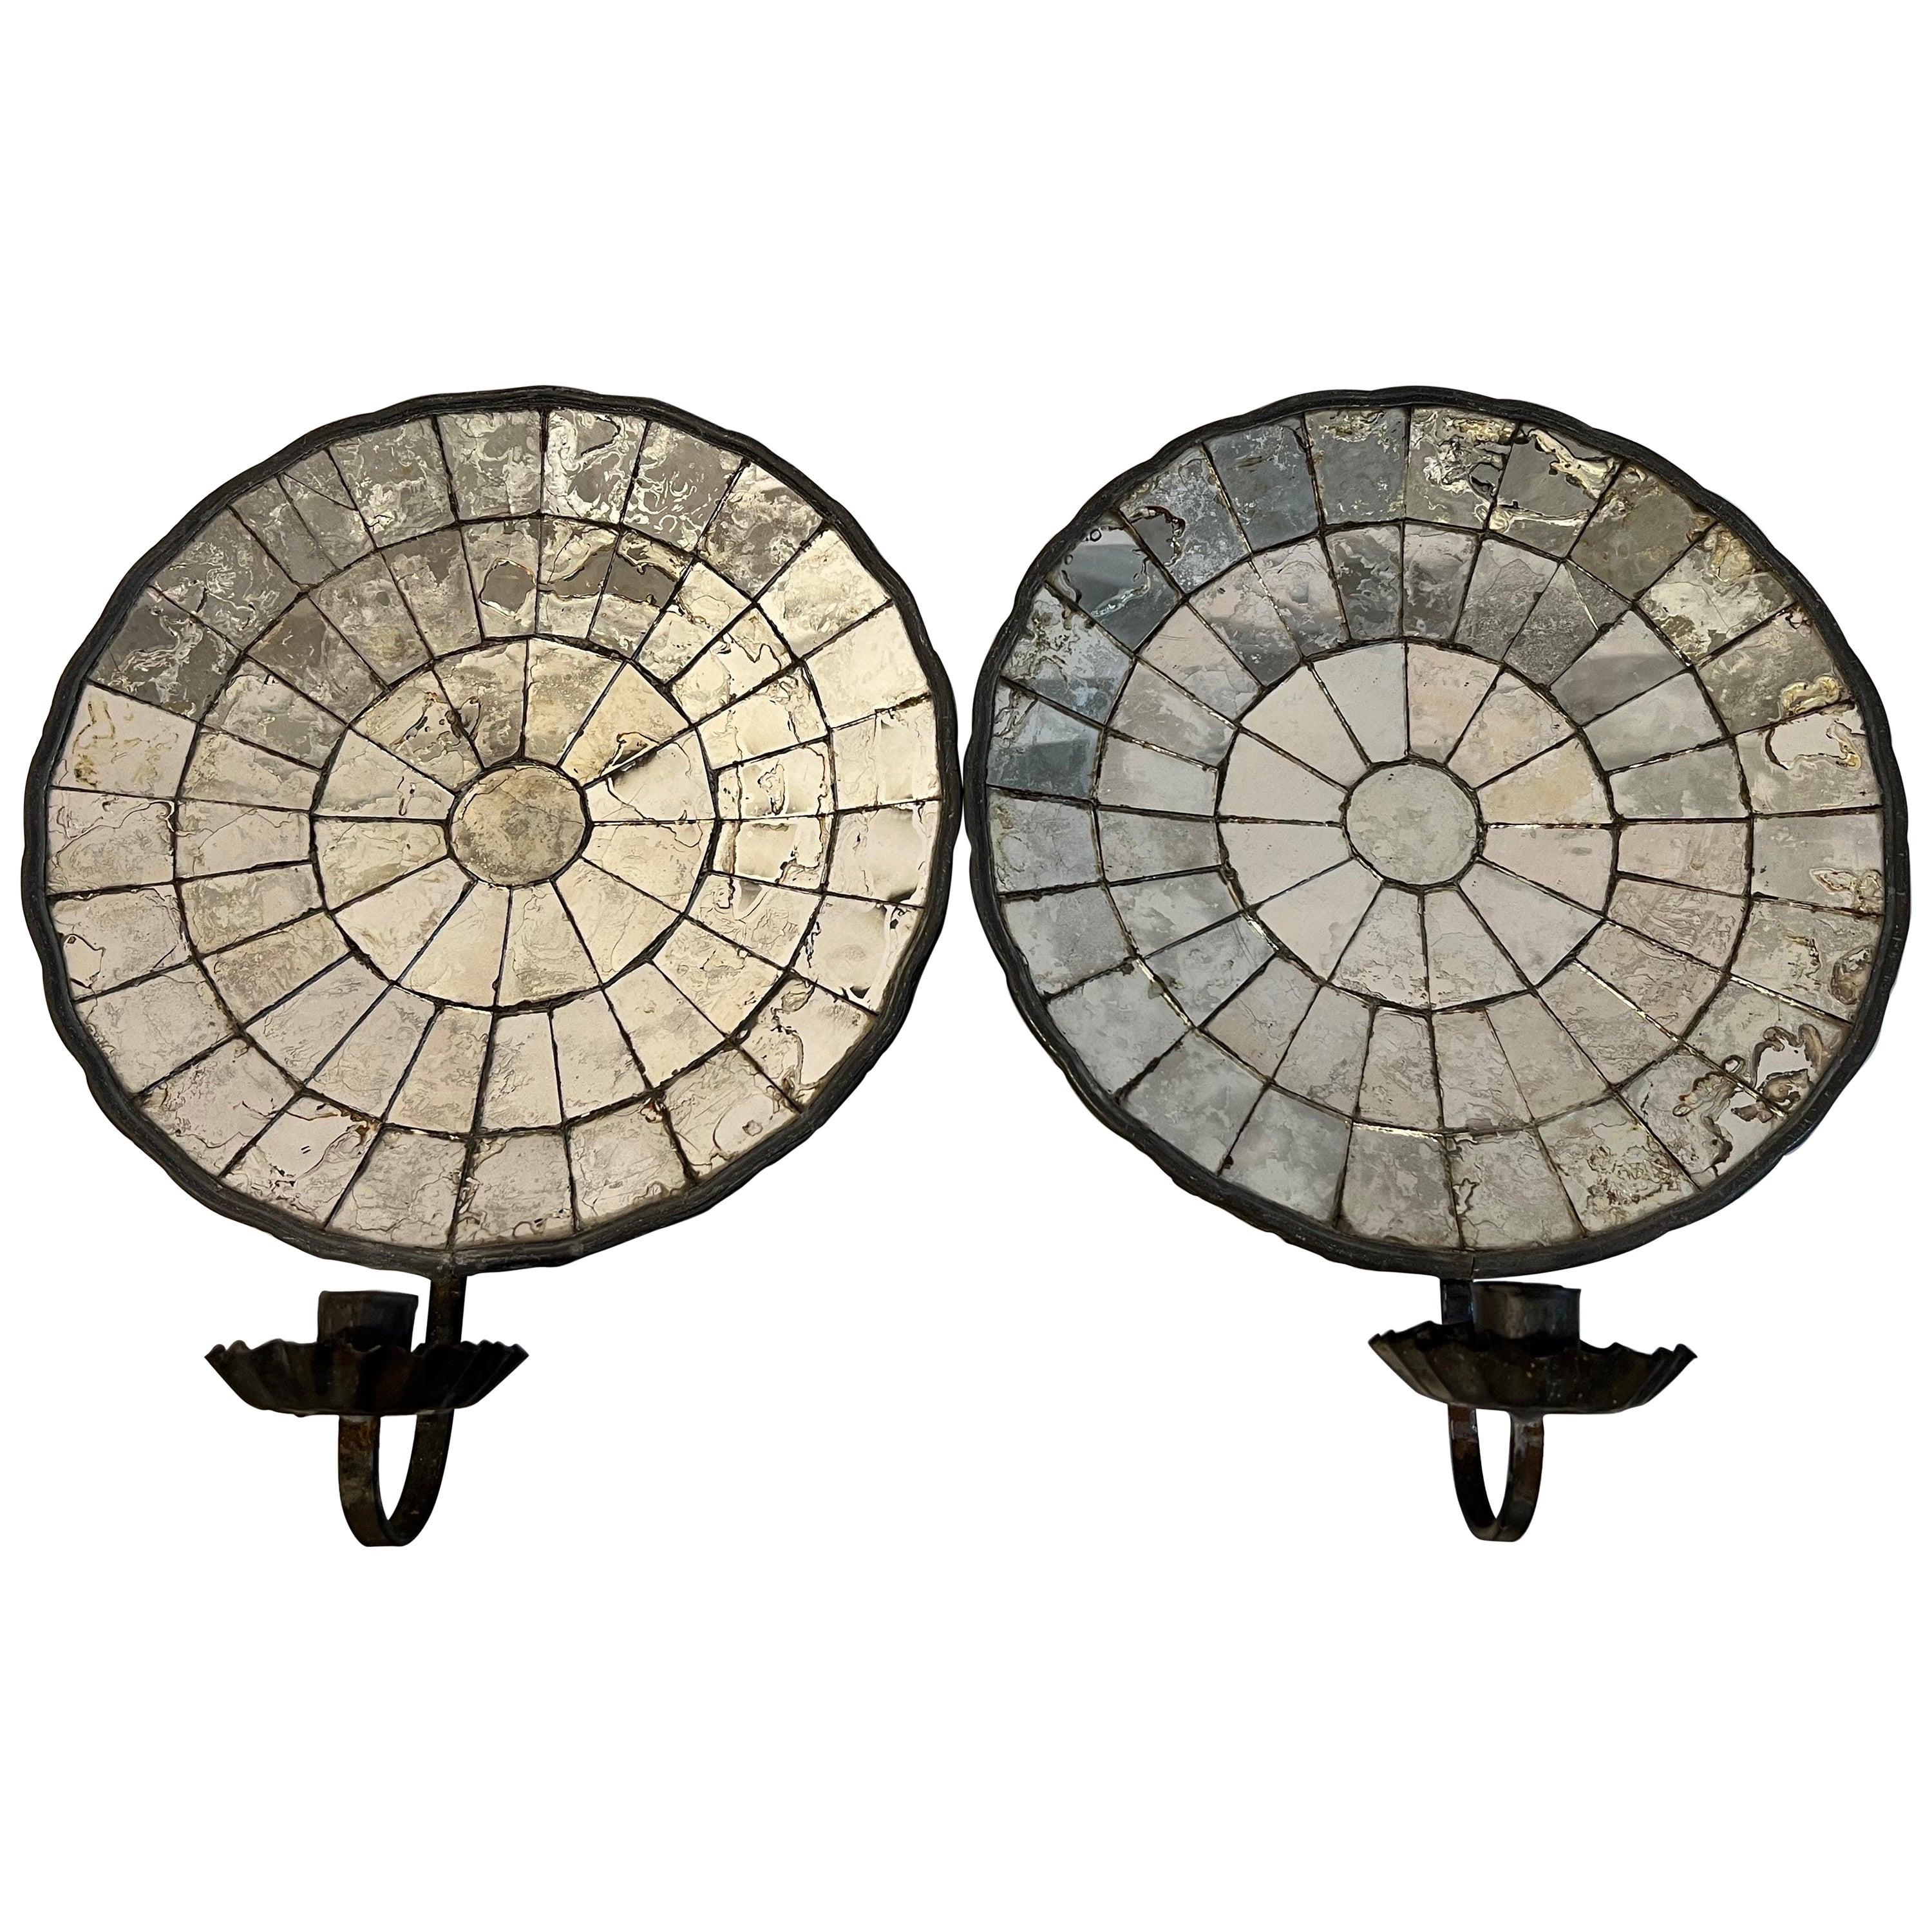 Pair of Early American Reflective Candle Sconces